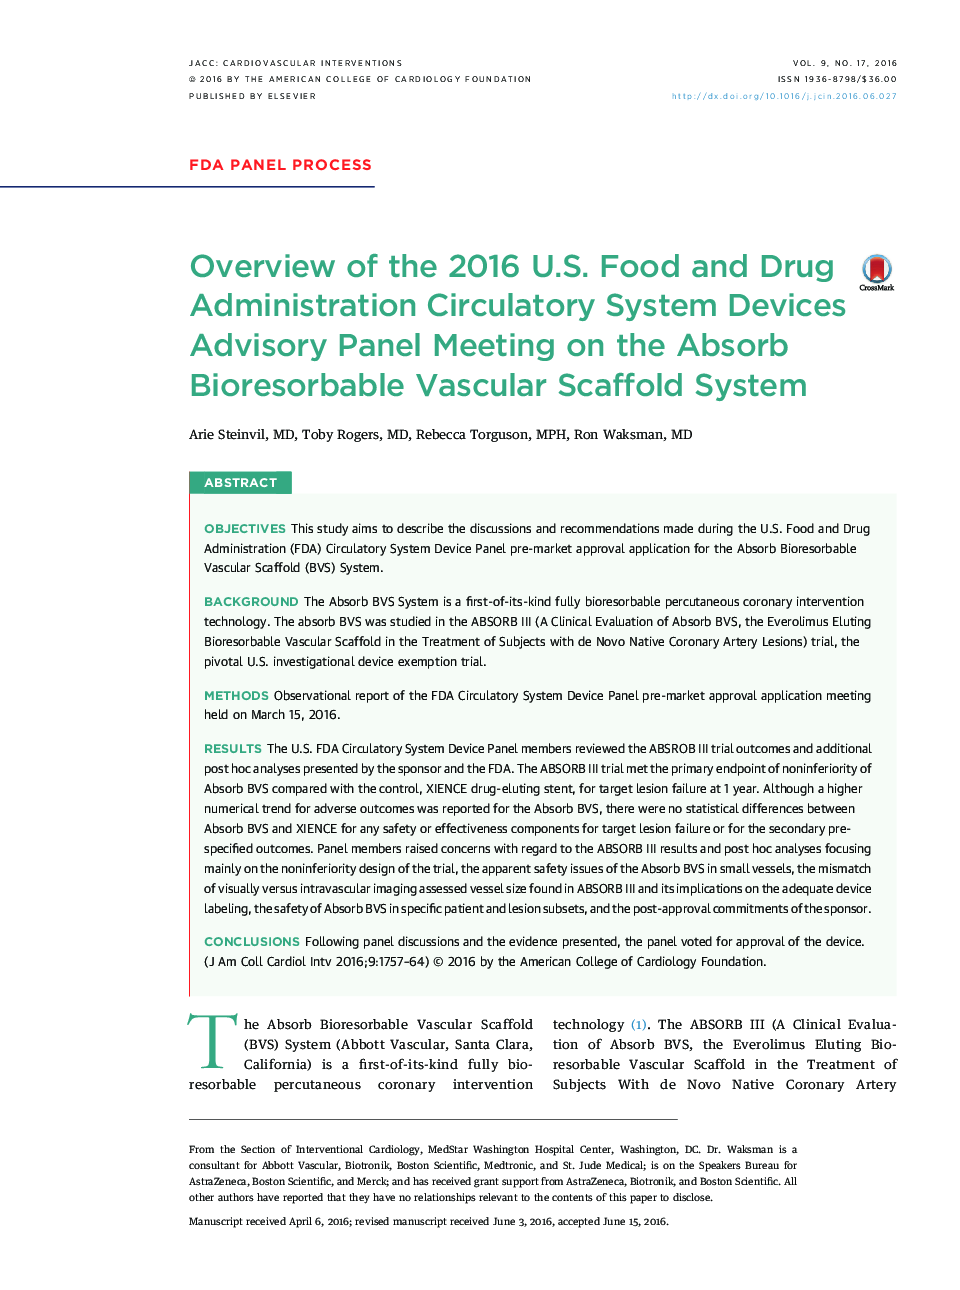 Overview of the 2016 U.S. Food and Drug Administration Circulatory System Devices Advisory Panel Meeting on the Absorb Bioresorbable Vascular Scaffold System 